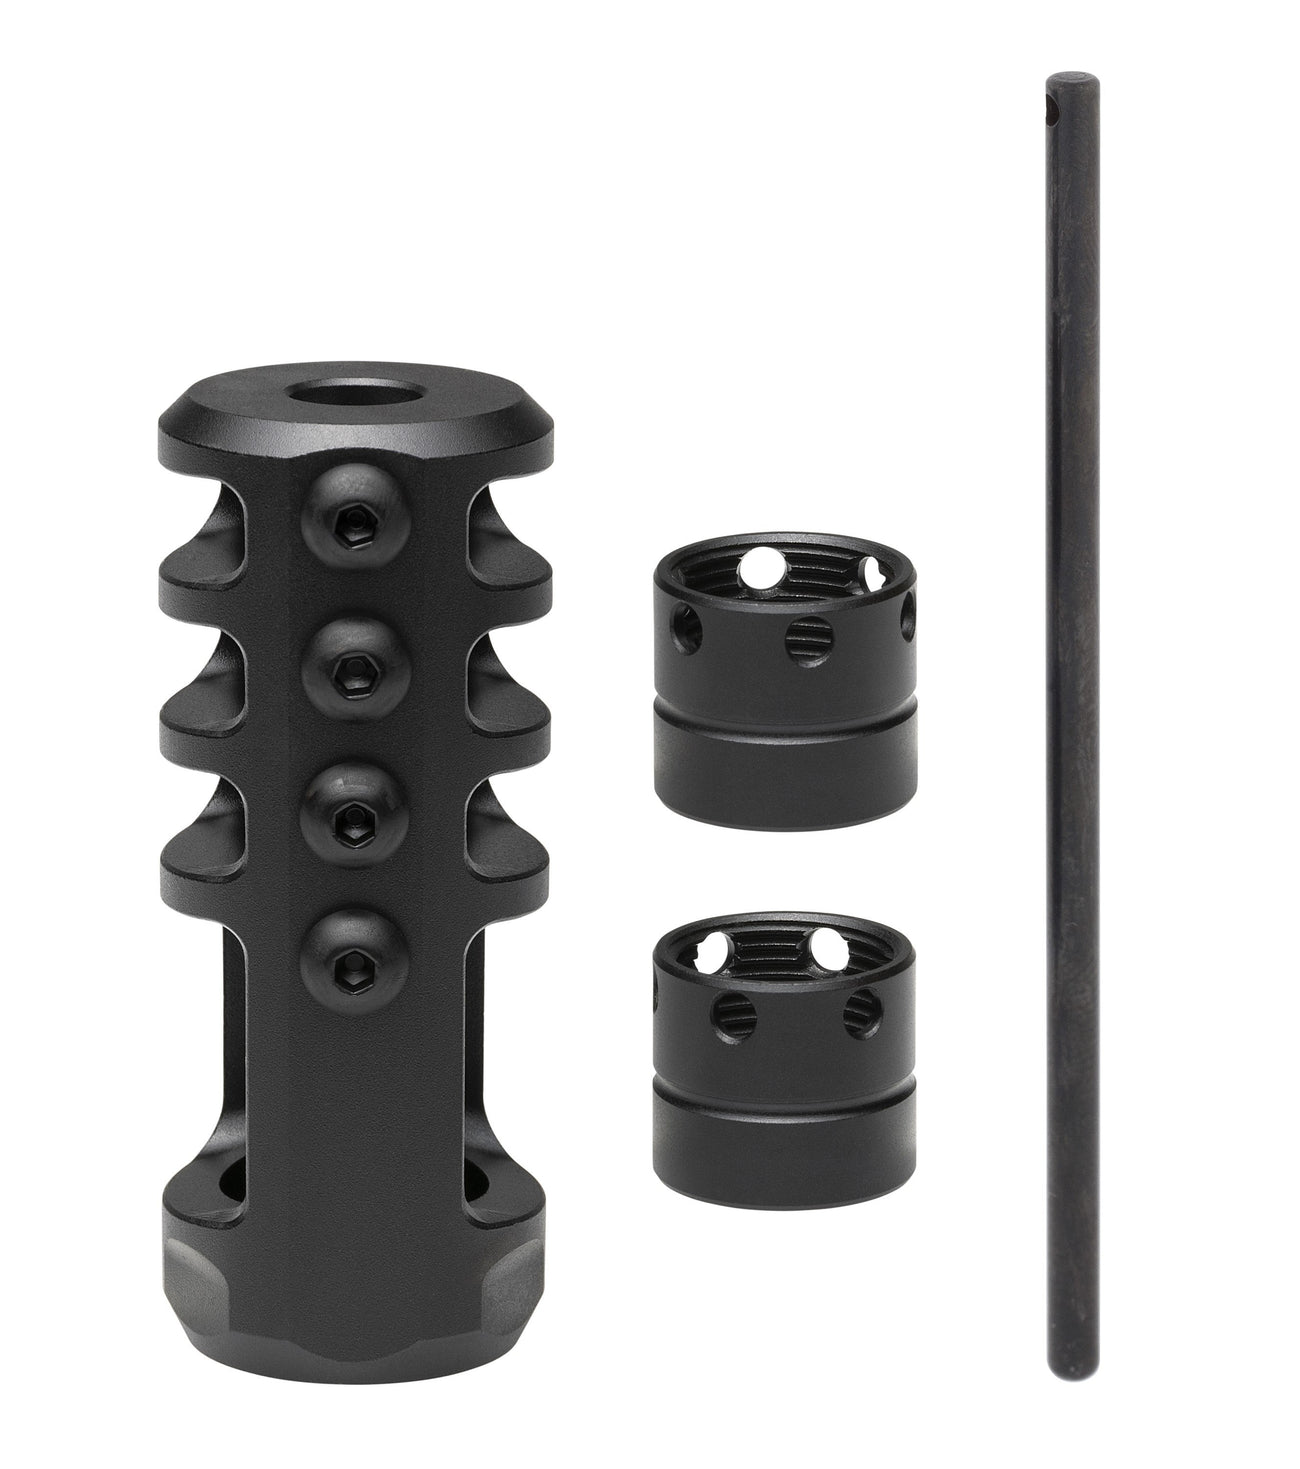 Competition Recoil Hawg Muzzle Brake